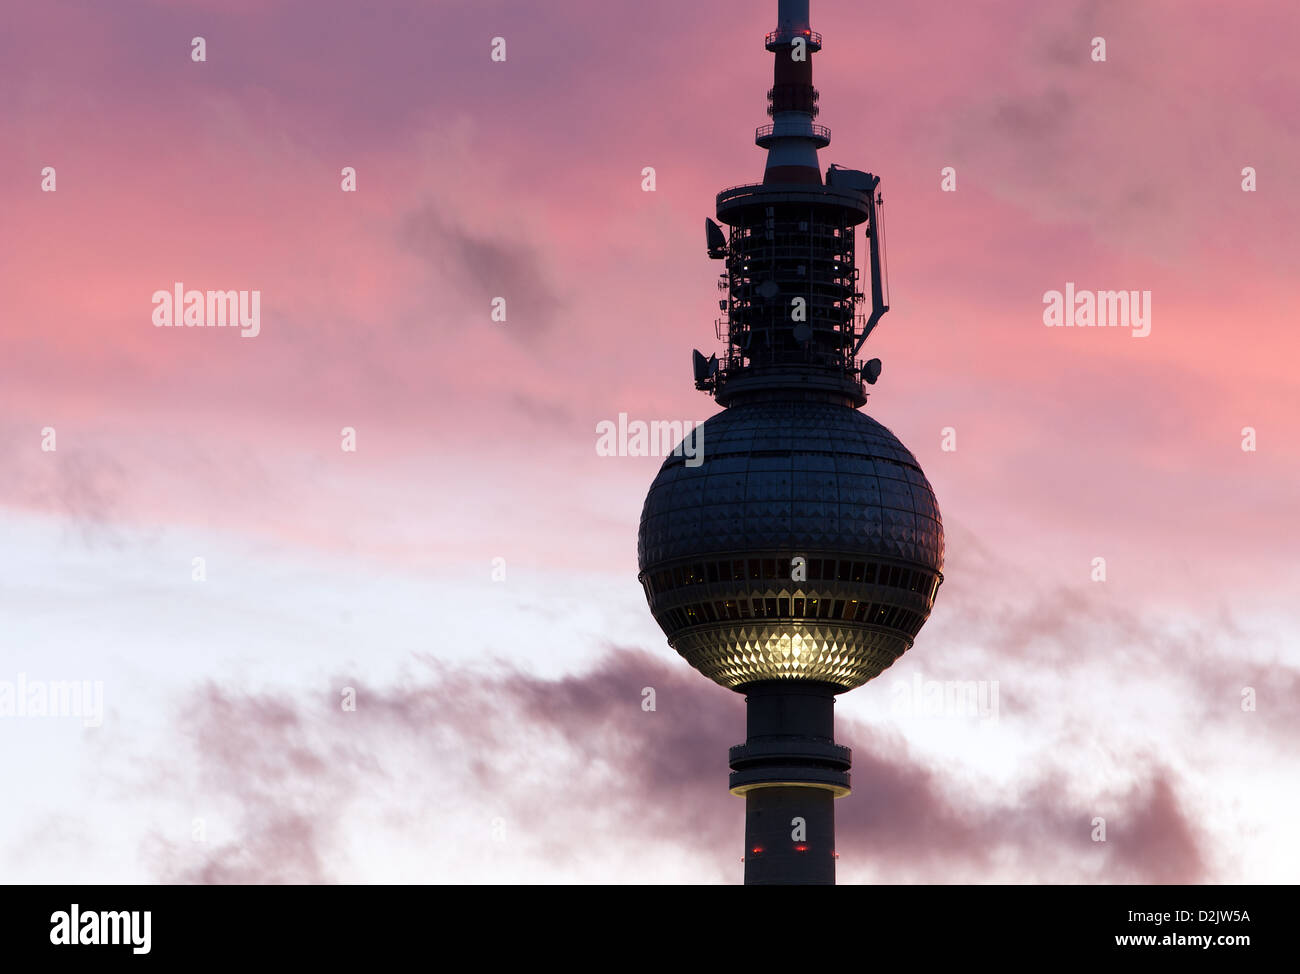 Berlin, Germany, the Berlin TV tower at sunset Stock Photo